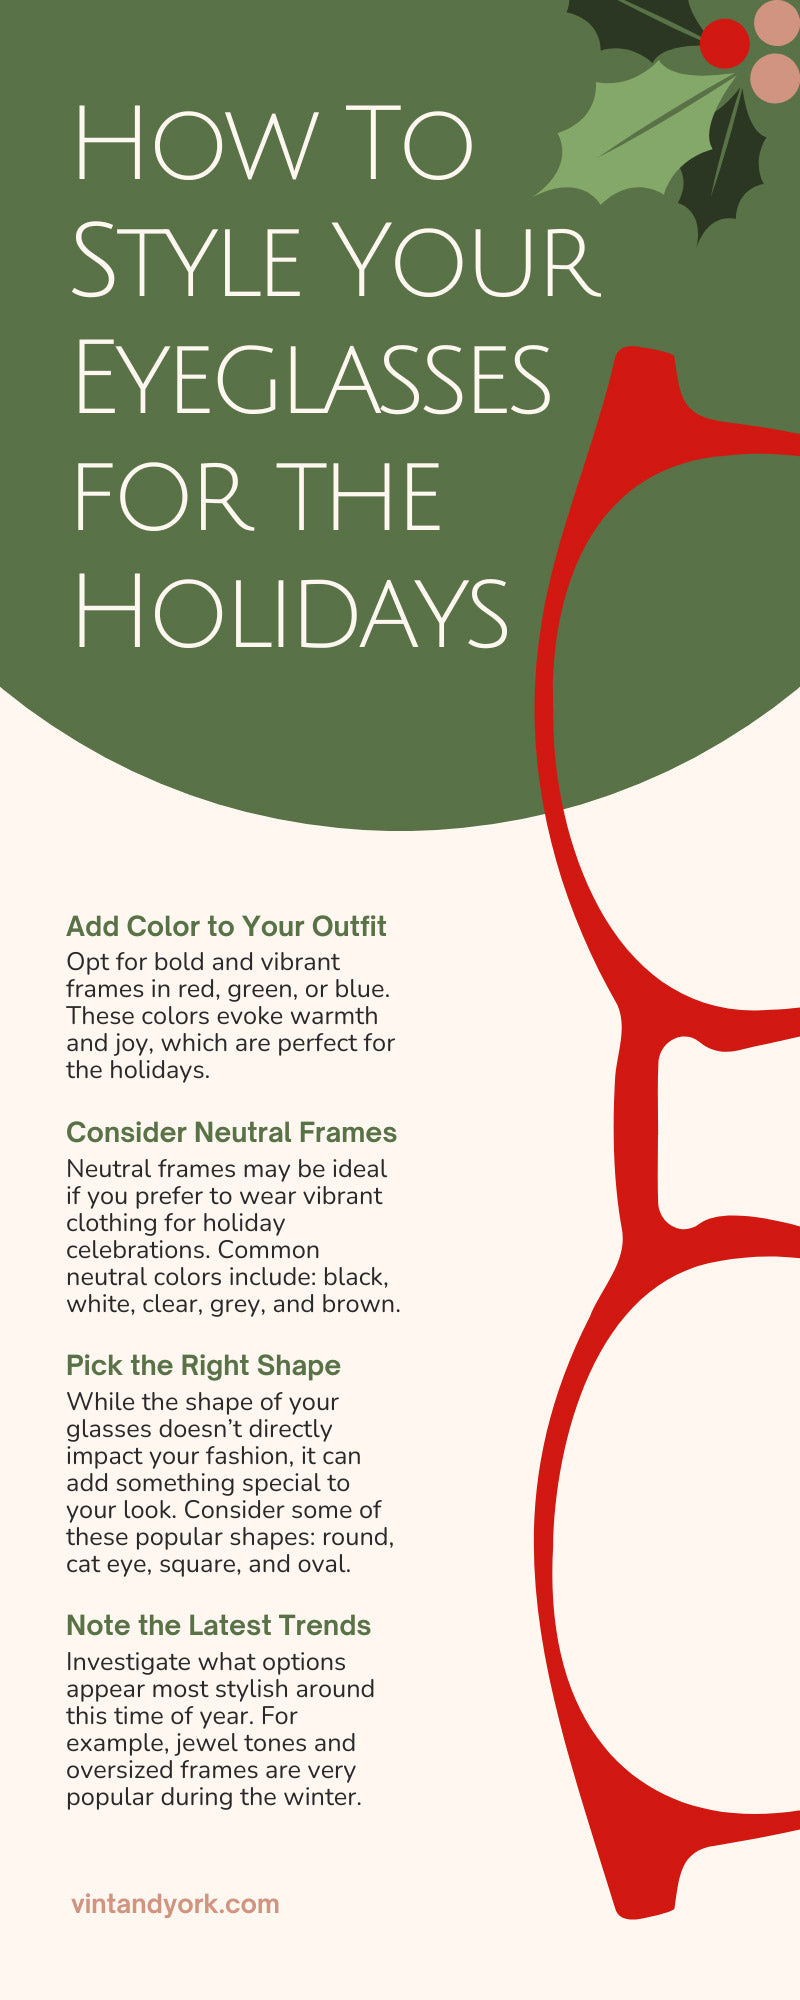 How To Style Your Eyeglasses for the Holidays